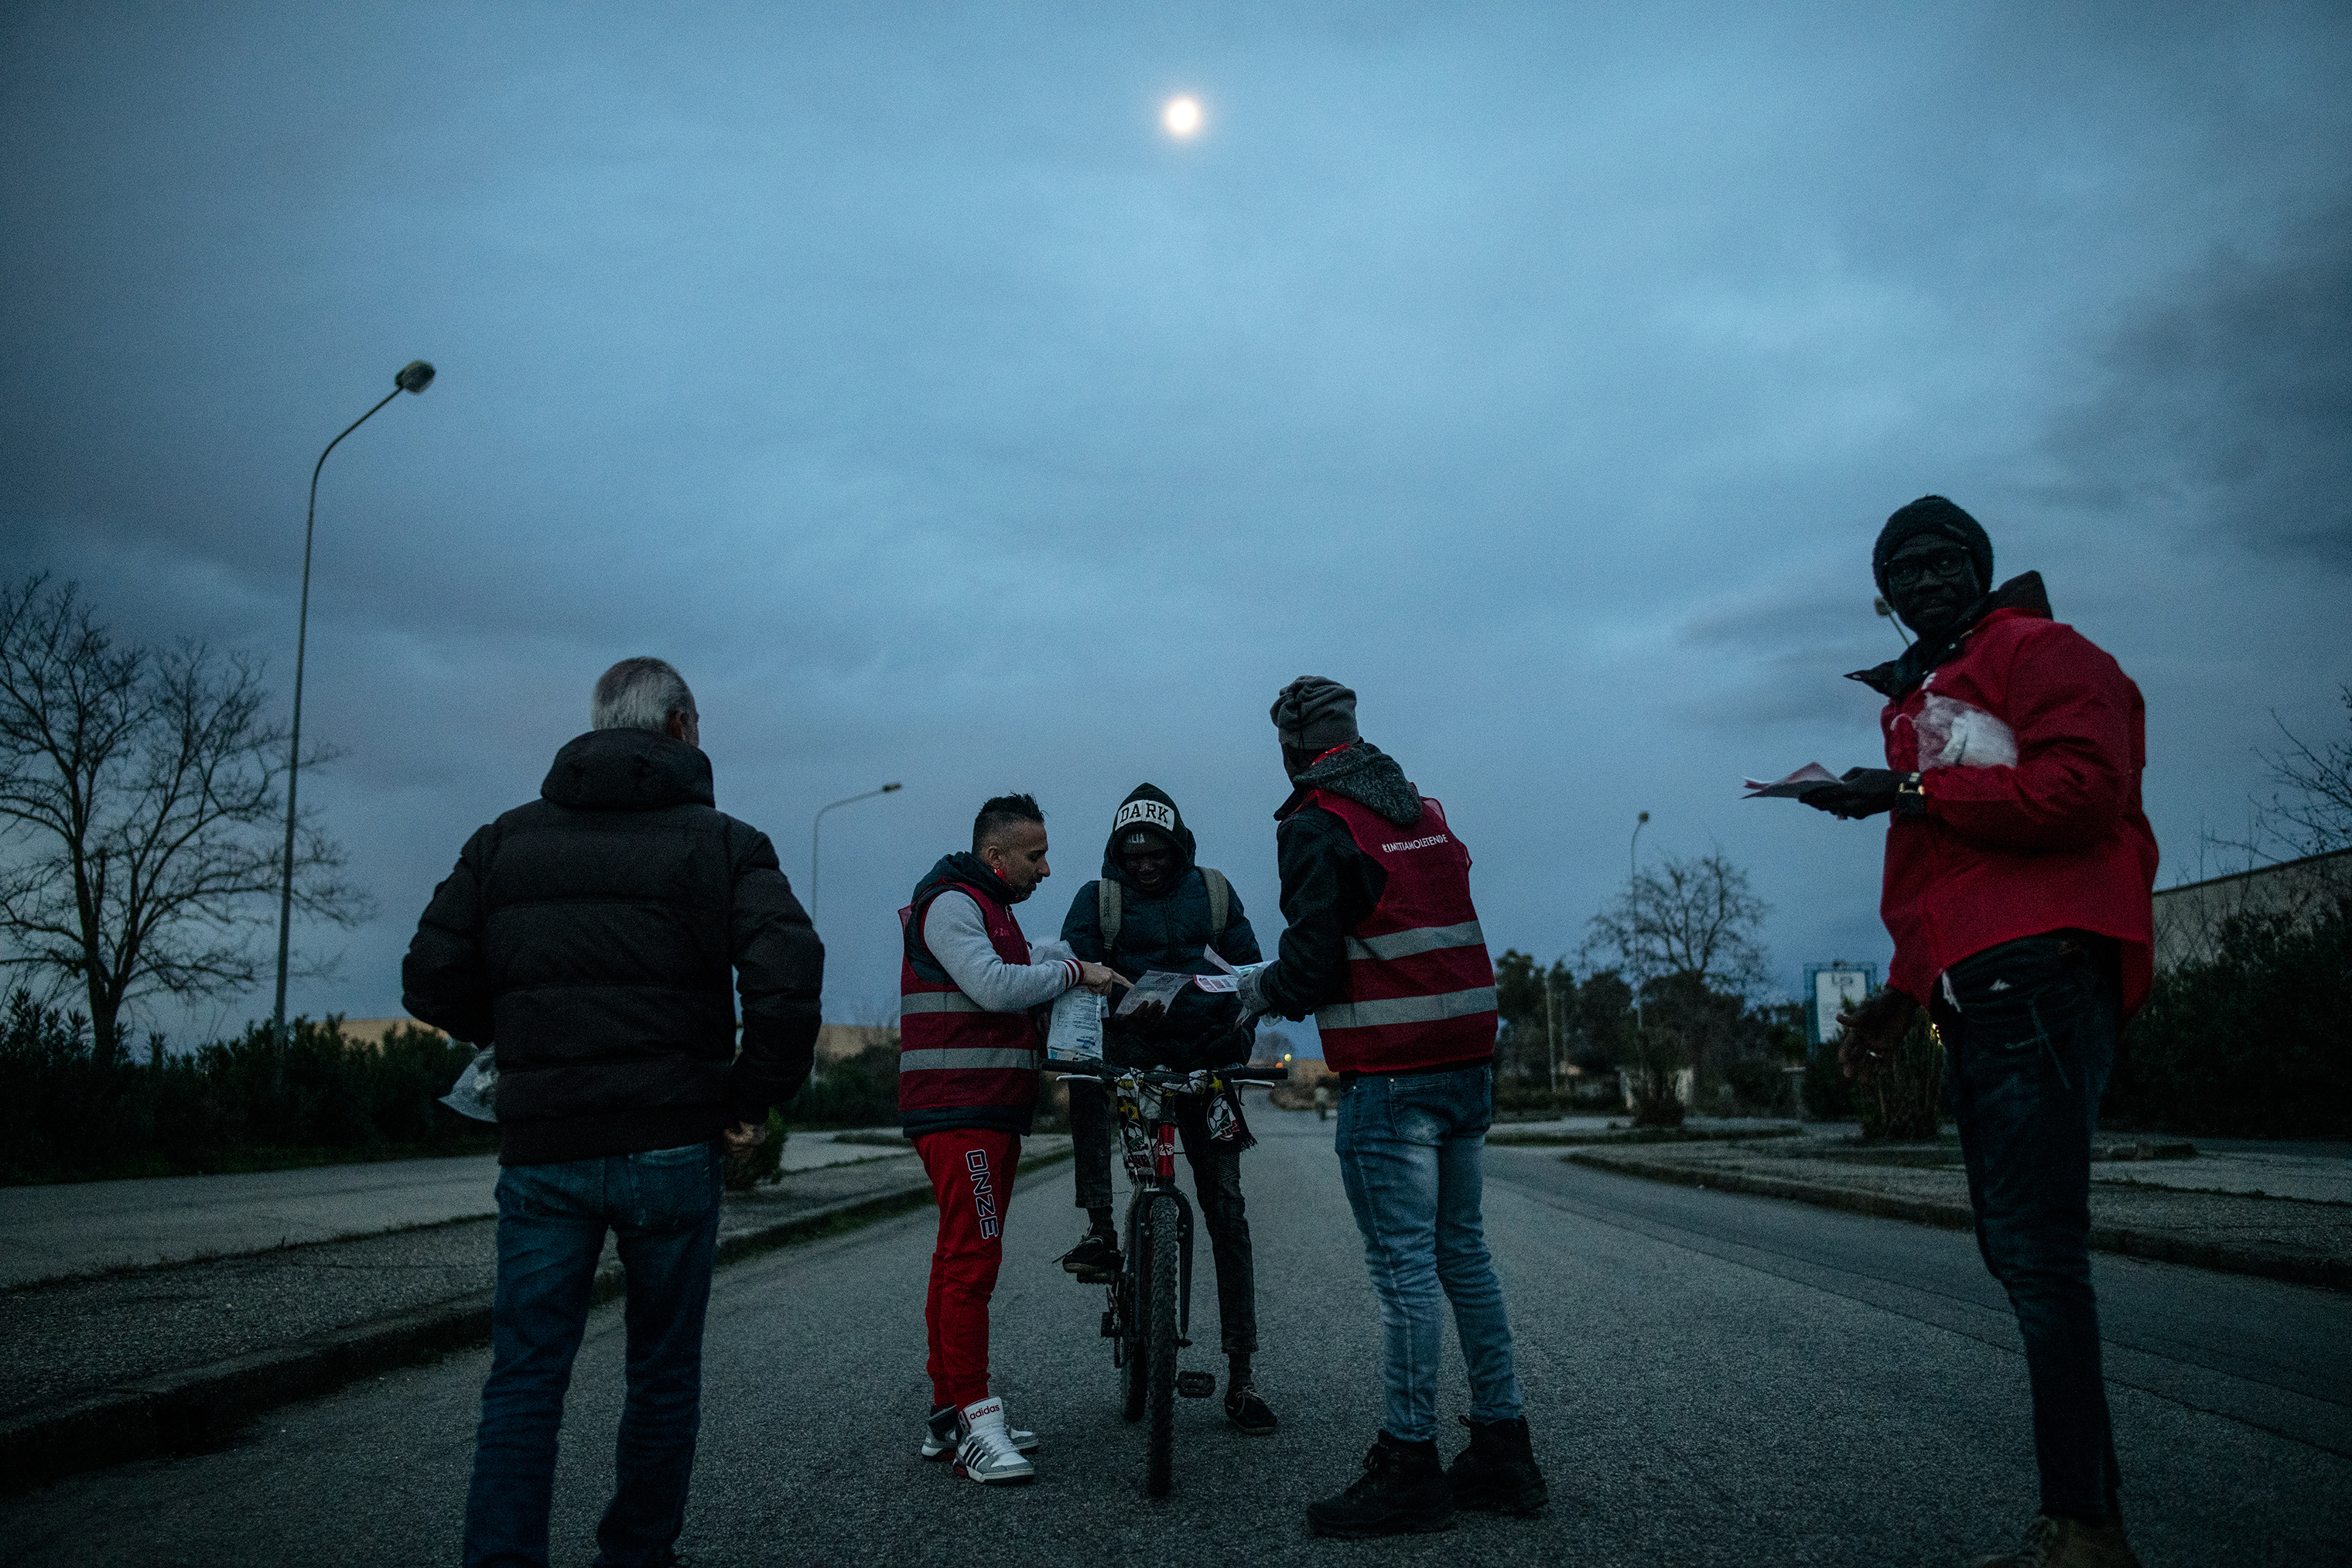 Migrant workers receive educational pamphlets about their rights in Italy, Jan. 24, 2019. (Lynsey Addario for TIME)